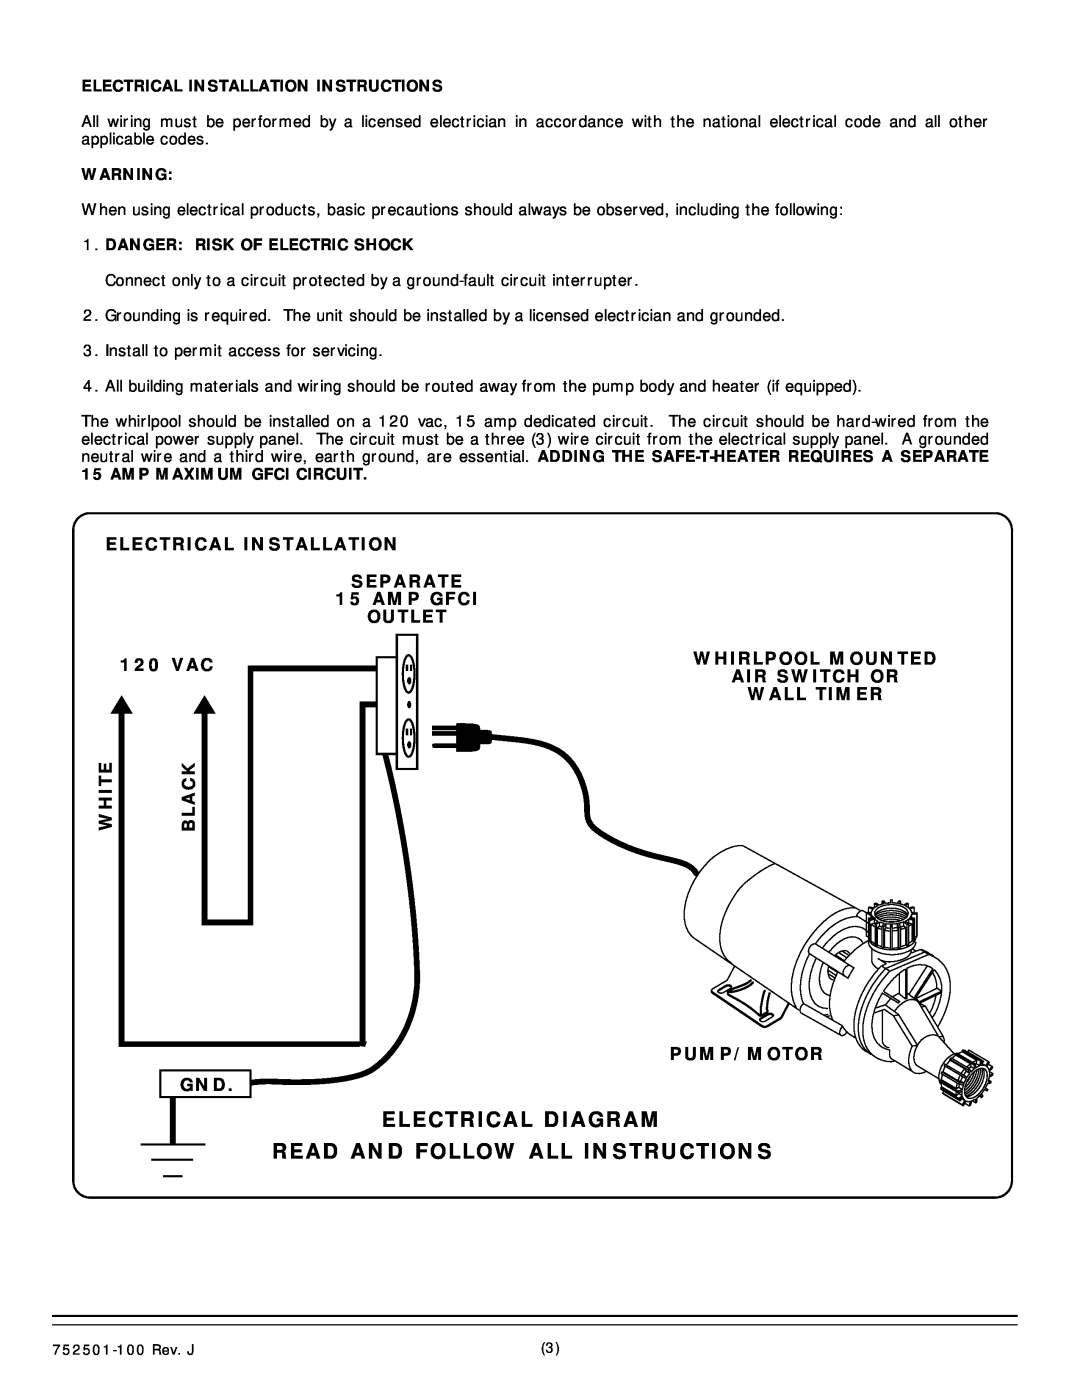 American Standard 2772.XXXW Electrical Diagram, Read And Follow All Instructions, Outlet, 120 VAC, Whirlpool Mounted 